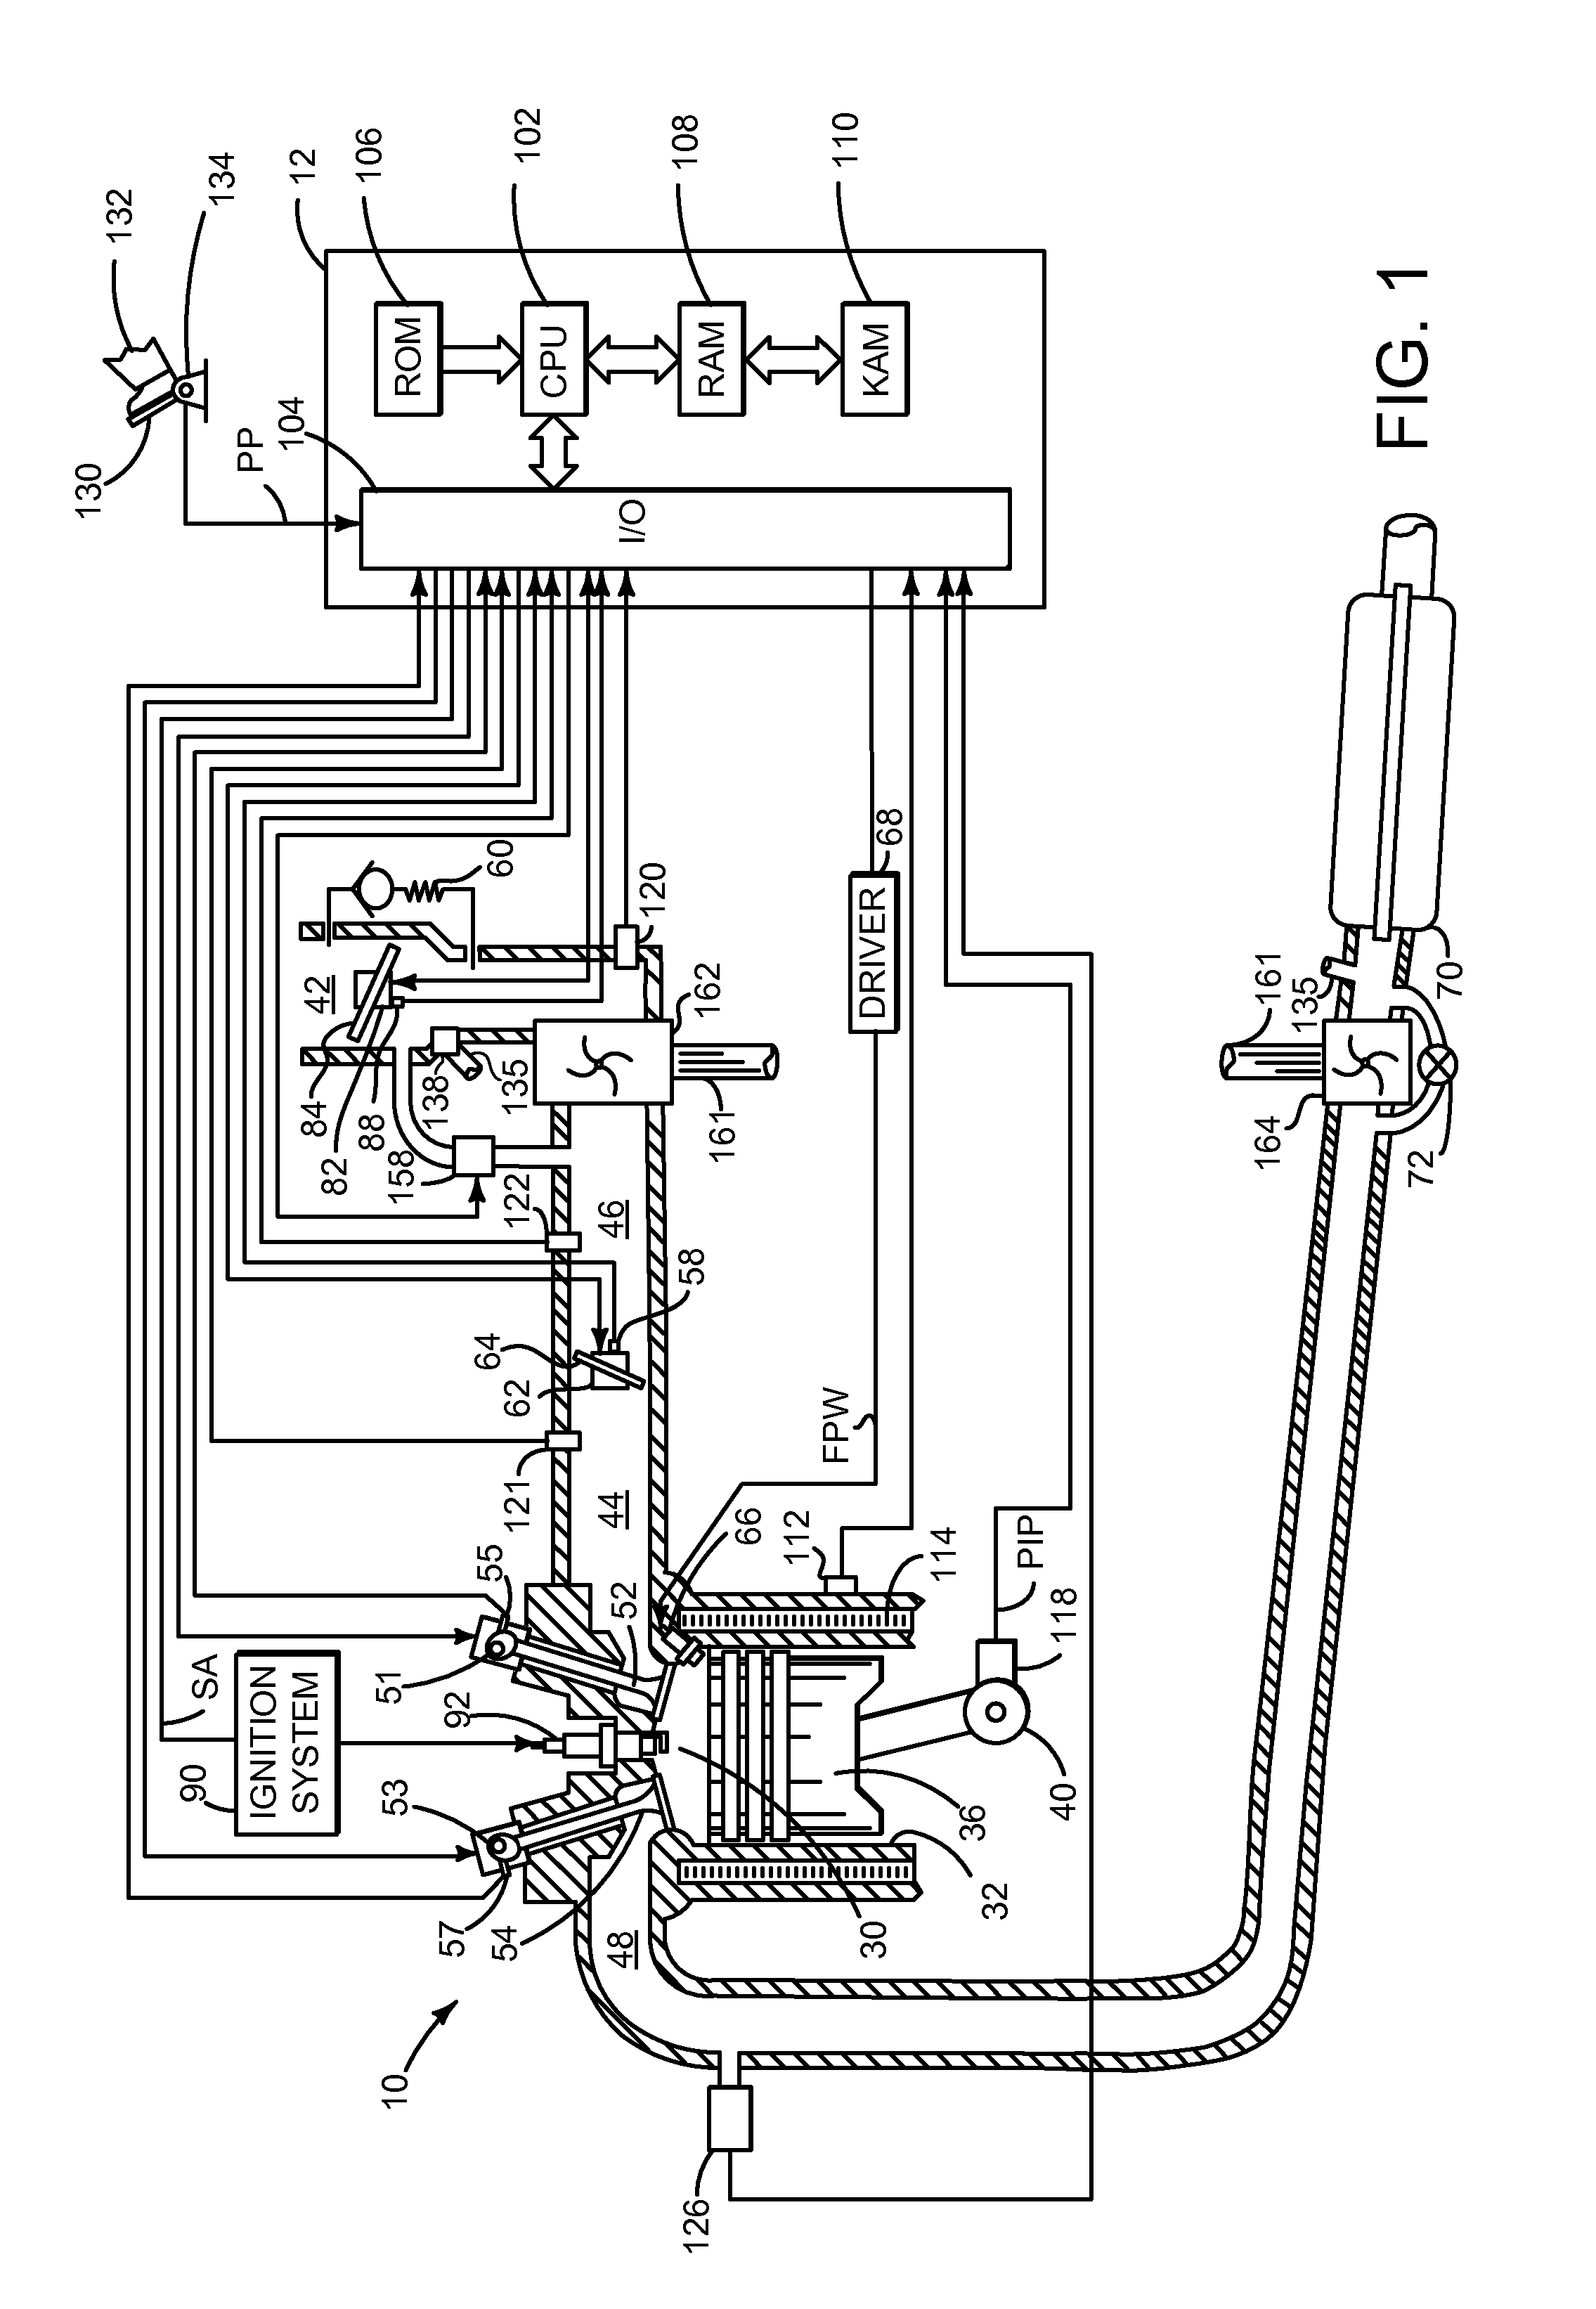 Method and System for Providing Air to an Engine